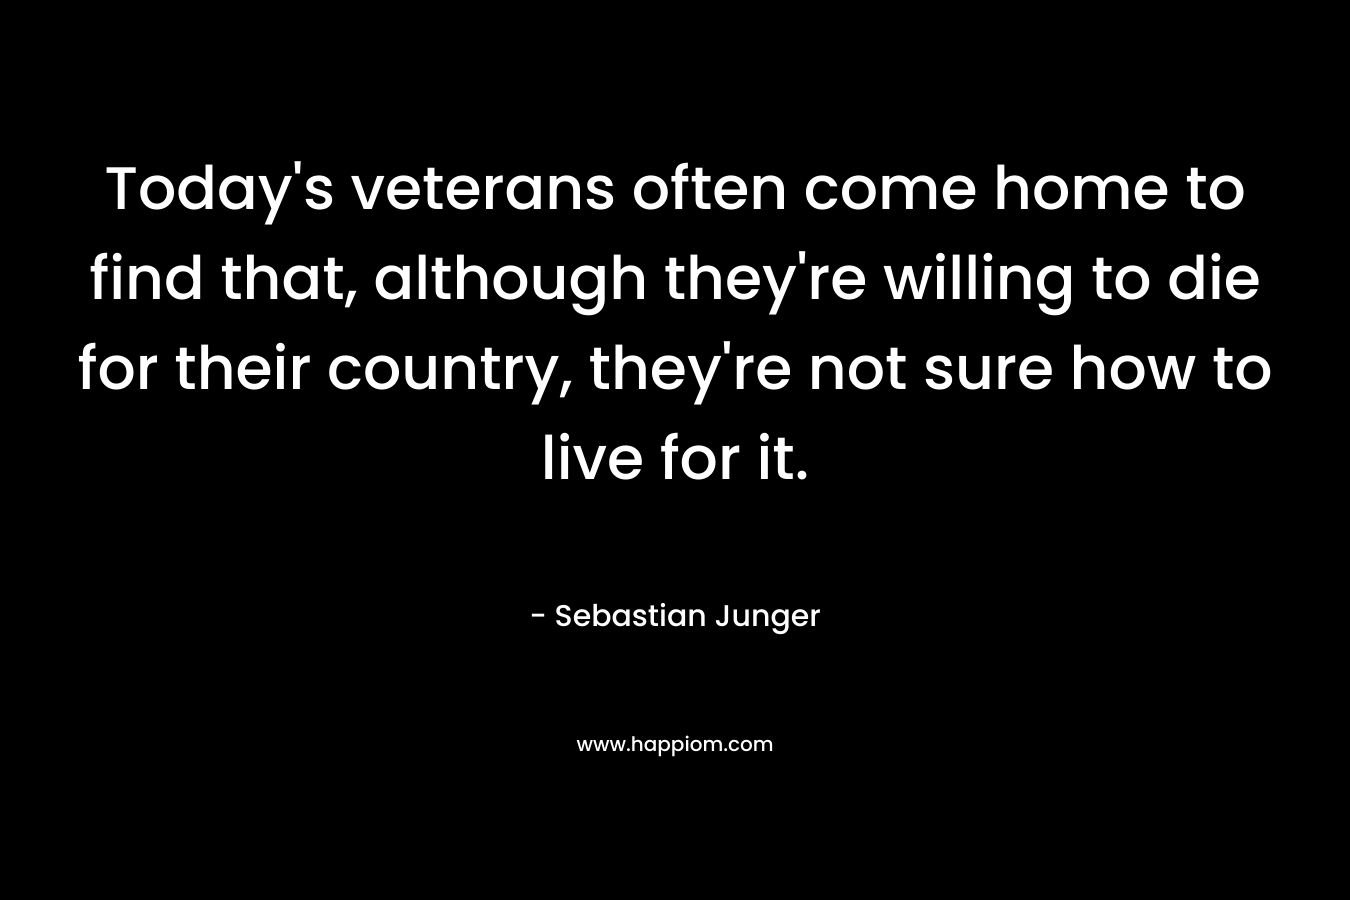 Today’s veterans often come home to find that, although they’re willing to die for their country, they’re not sure how to live for it. – Sebastian Junger